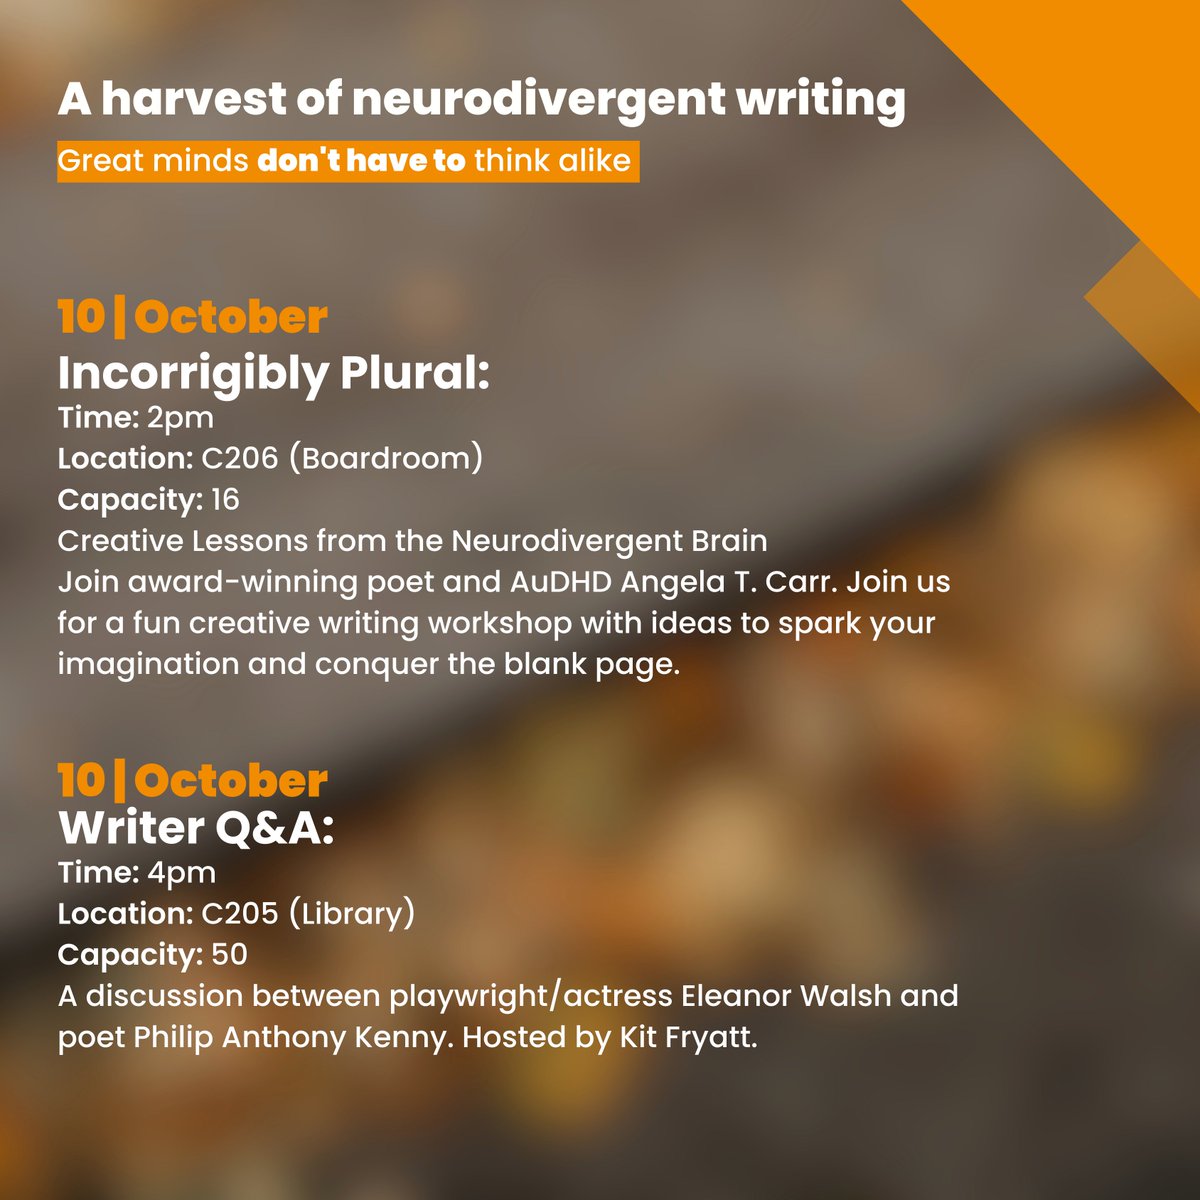 Different Expressions Literary Festival this Tues and Wed at DCU. All events are FREE! As Poetry Ireland's PiR, I'm giving a workshop 'Building Resilience' Wed at 3 p.m. Book your place for all events dcustudentlife.native.fm #neurodivergent #poetinresidence #writinglife